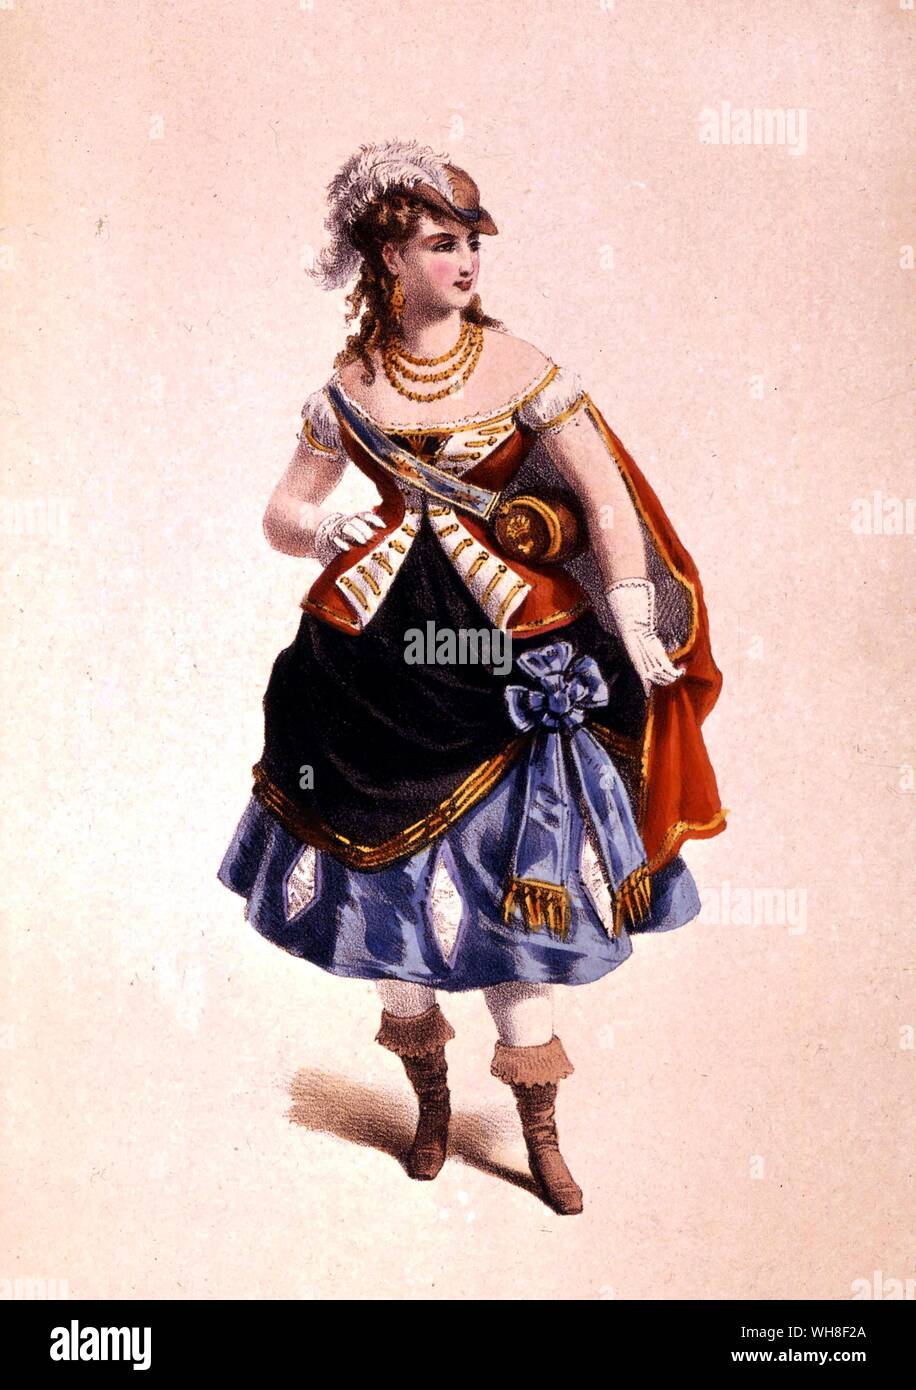 Vivandières costume 1860. La Vie Parisienne by Joanna Richardson (1860), page 91. La Vie Parisienne (Parisian Life), composed by Jacques Offenbach (1819-1880), is a five-act opera about cosmopolitan life in Paris in the 1860s.. Vivandières (Hospitality giver) played an interesting, and often obscure role in the American Civil War. They travelled with soldiers for little or no pay as sutlers, mascots or nurses, while others fought alongside their male counterparts. Most Vivandières and regimental daughters were mascots, present for parades and reviews but not often seen in battle.. Officially Stock Photo